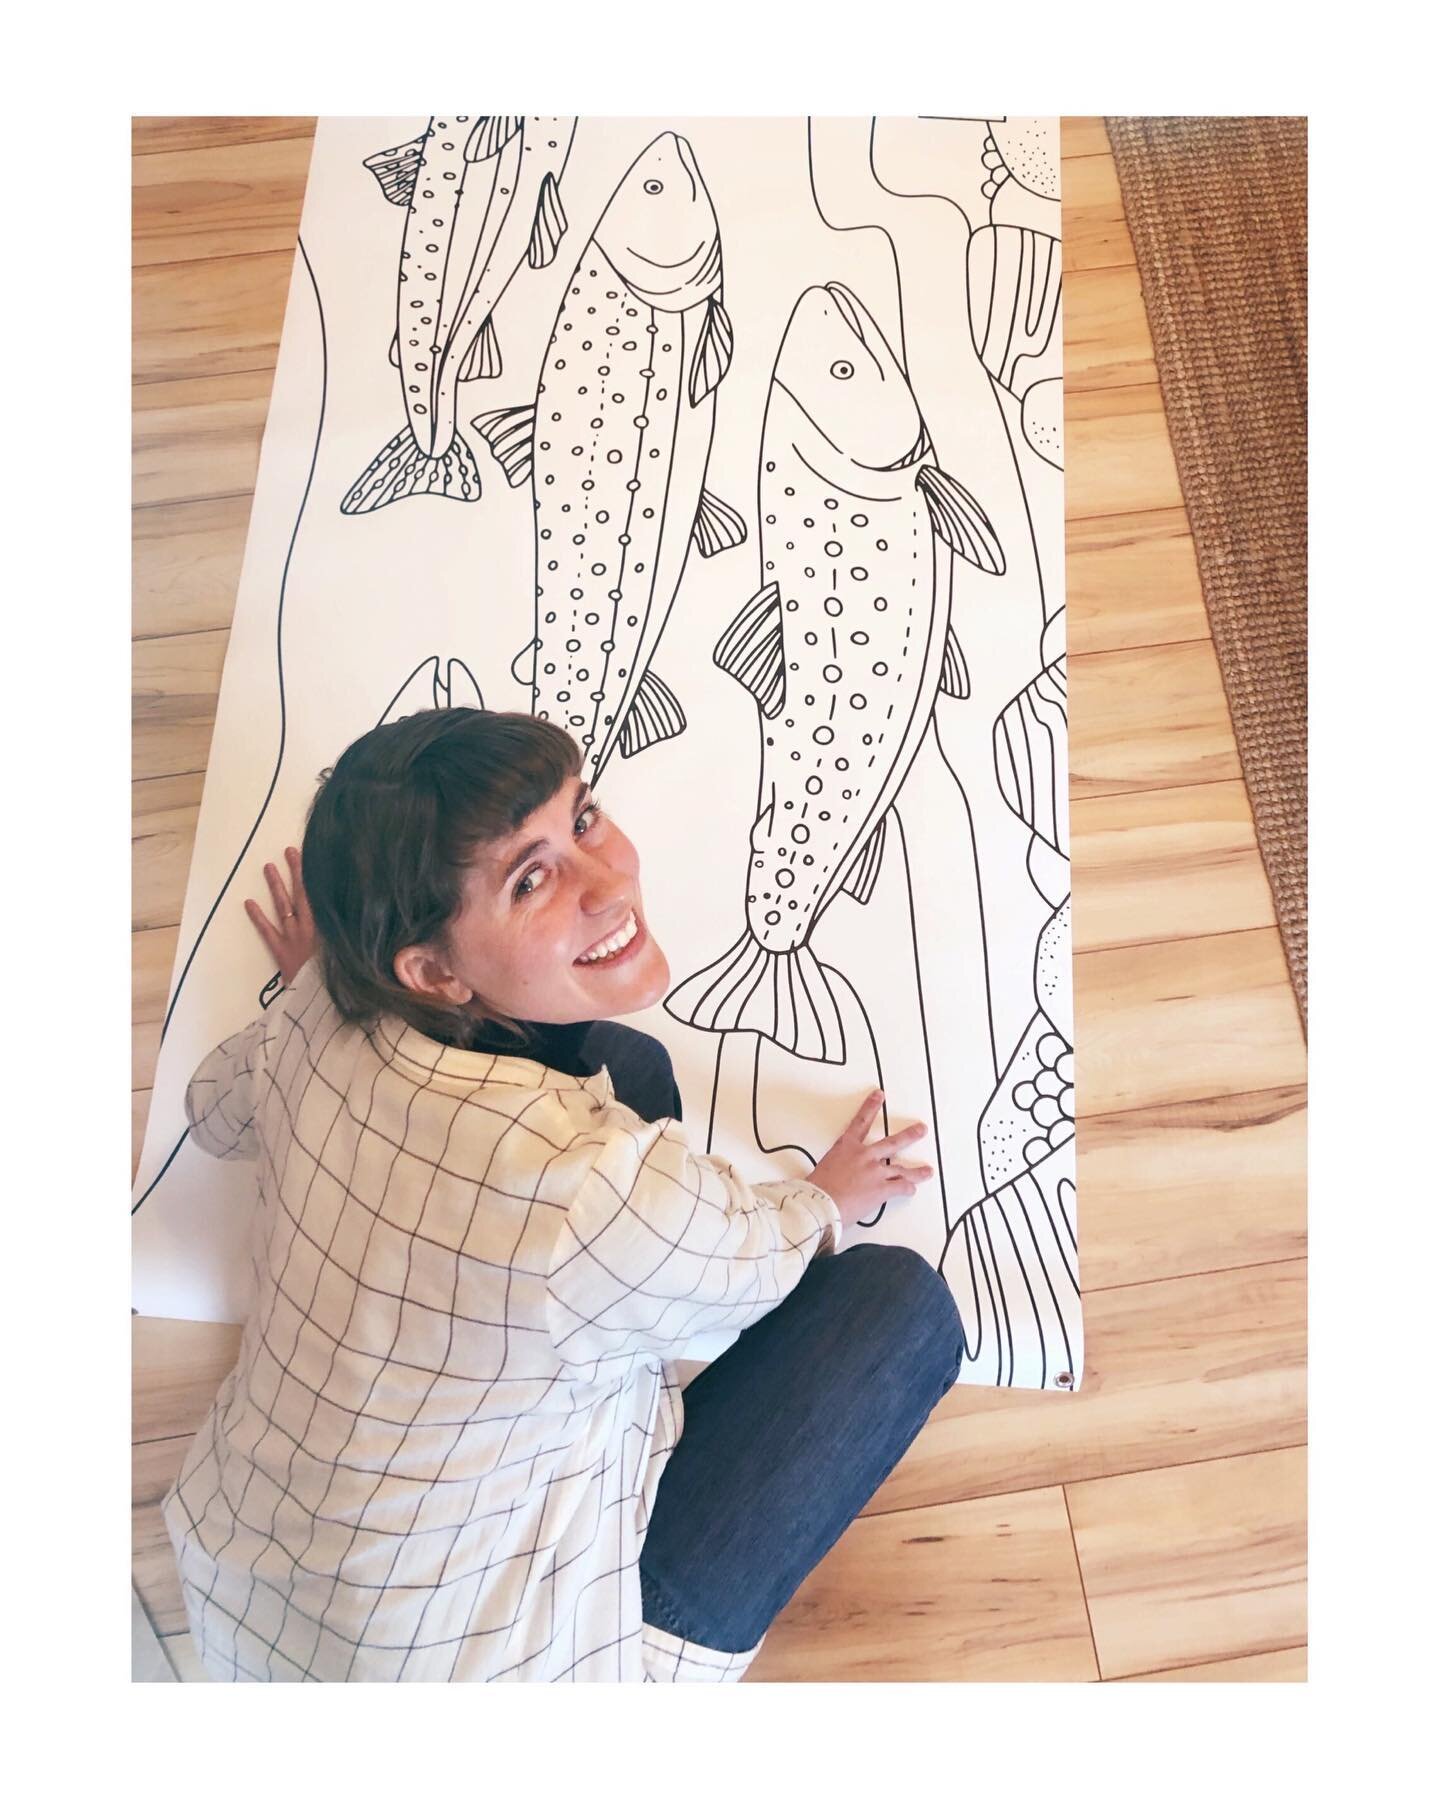 🐟🐟🐟🐟
We love drawing animals. this is a colour-in canvas banner to help spread awareness for our threatened trout friends here in Alberta. Give it a colour with @cpawssab at the Bow Habitat Station FISHtival on Feb 15th.